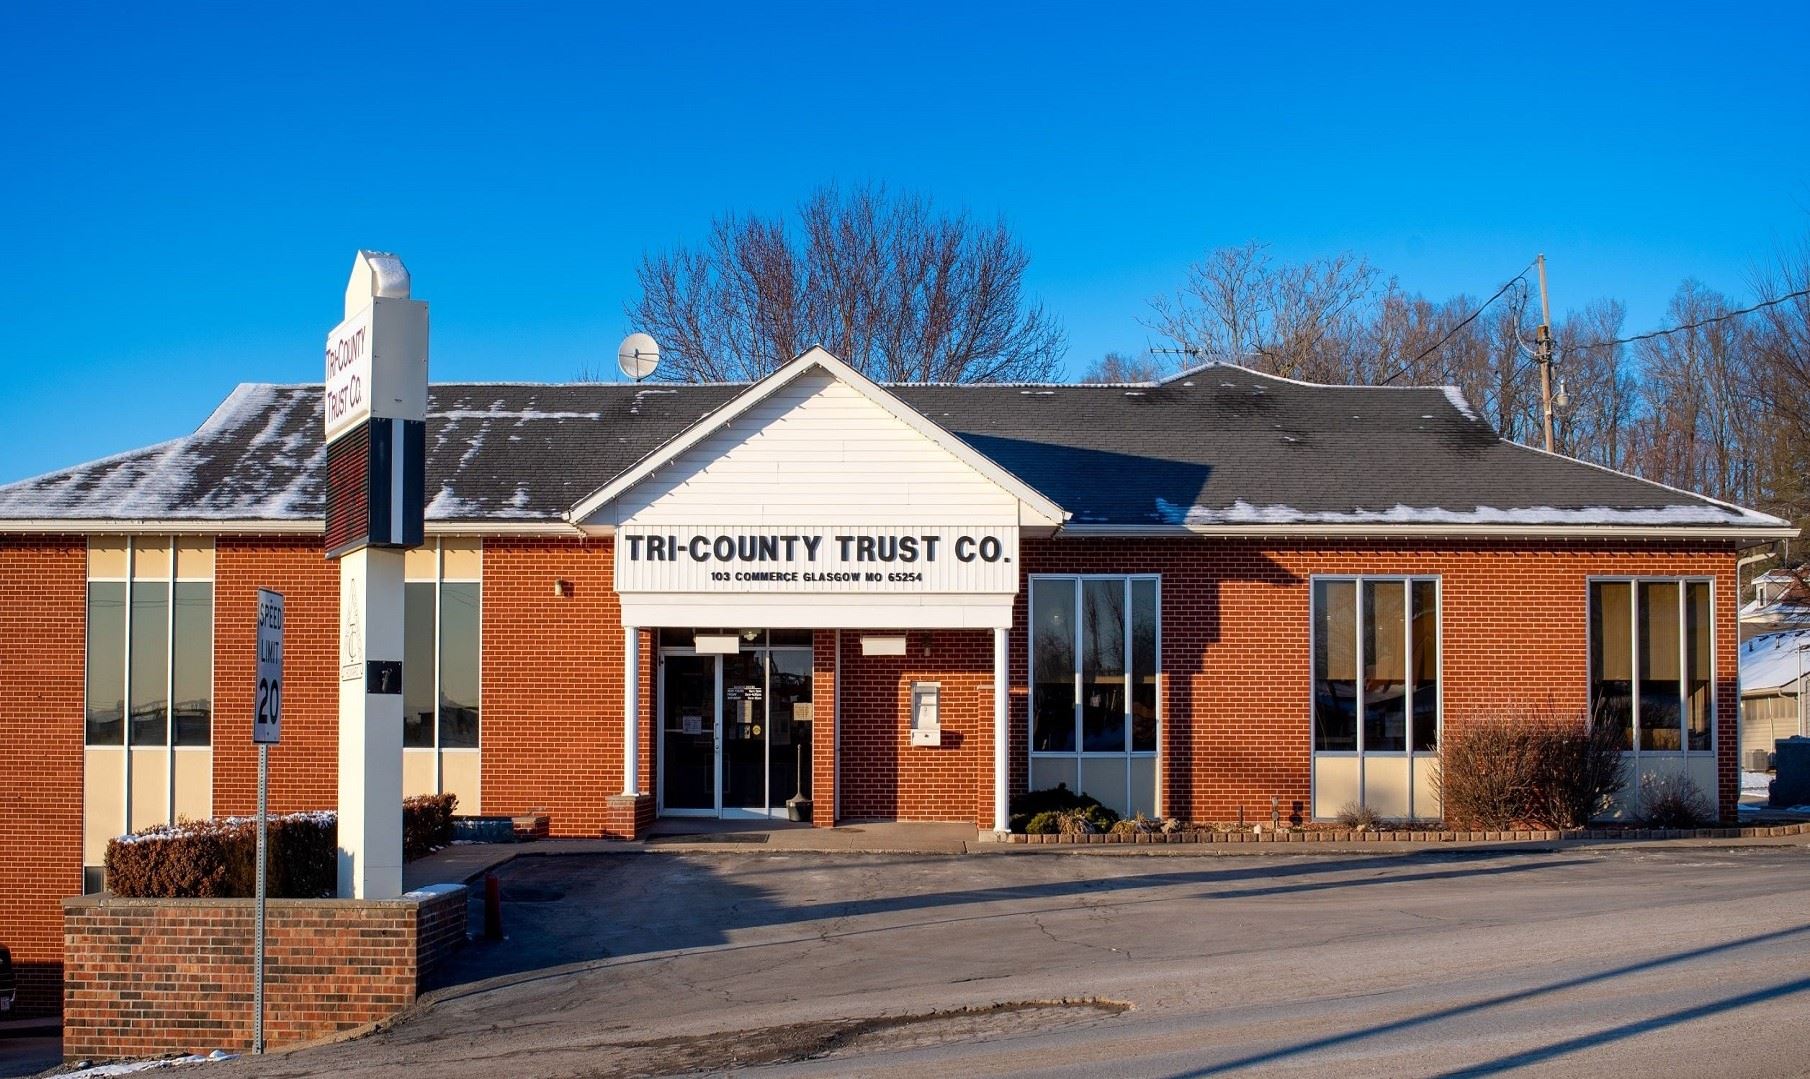 Tri-County Trust Co building with a blue sky in the back ground